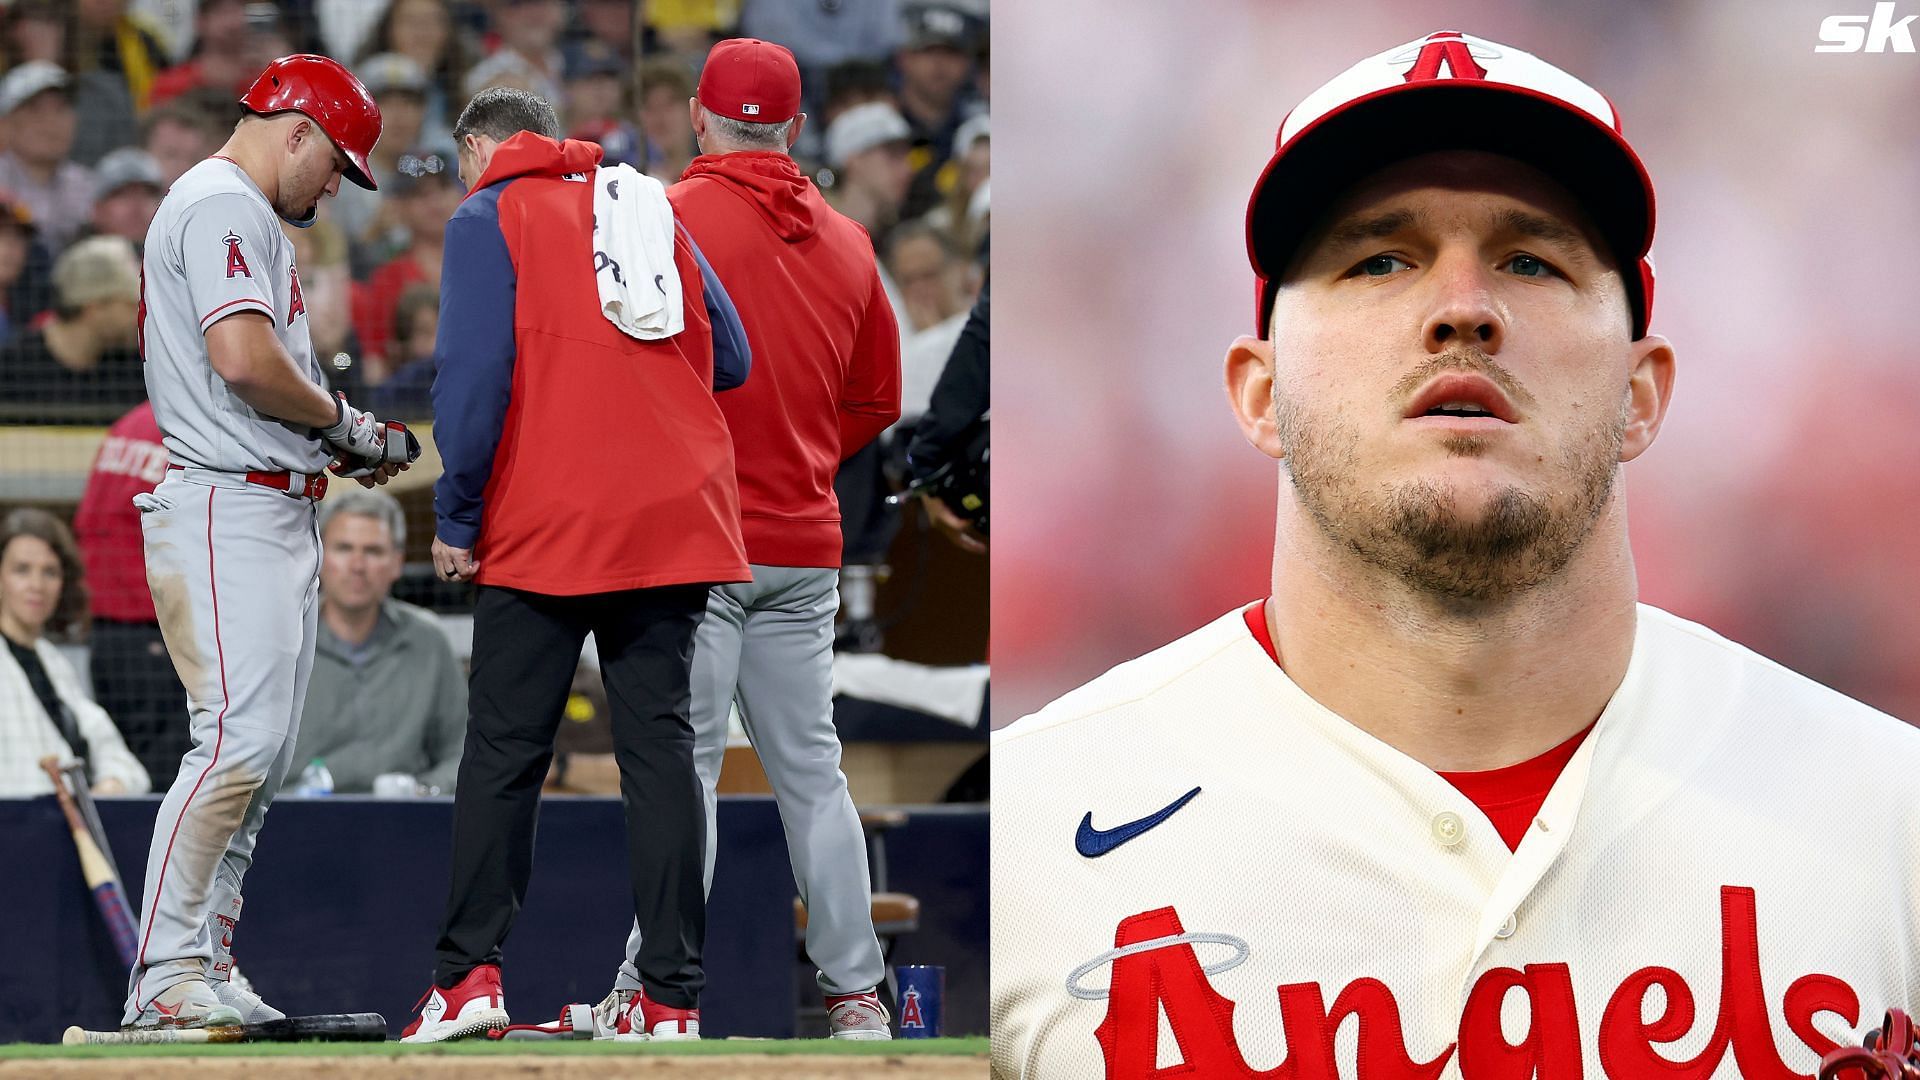 Angels' Mike Trout says back injury is getting better 